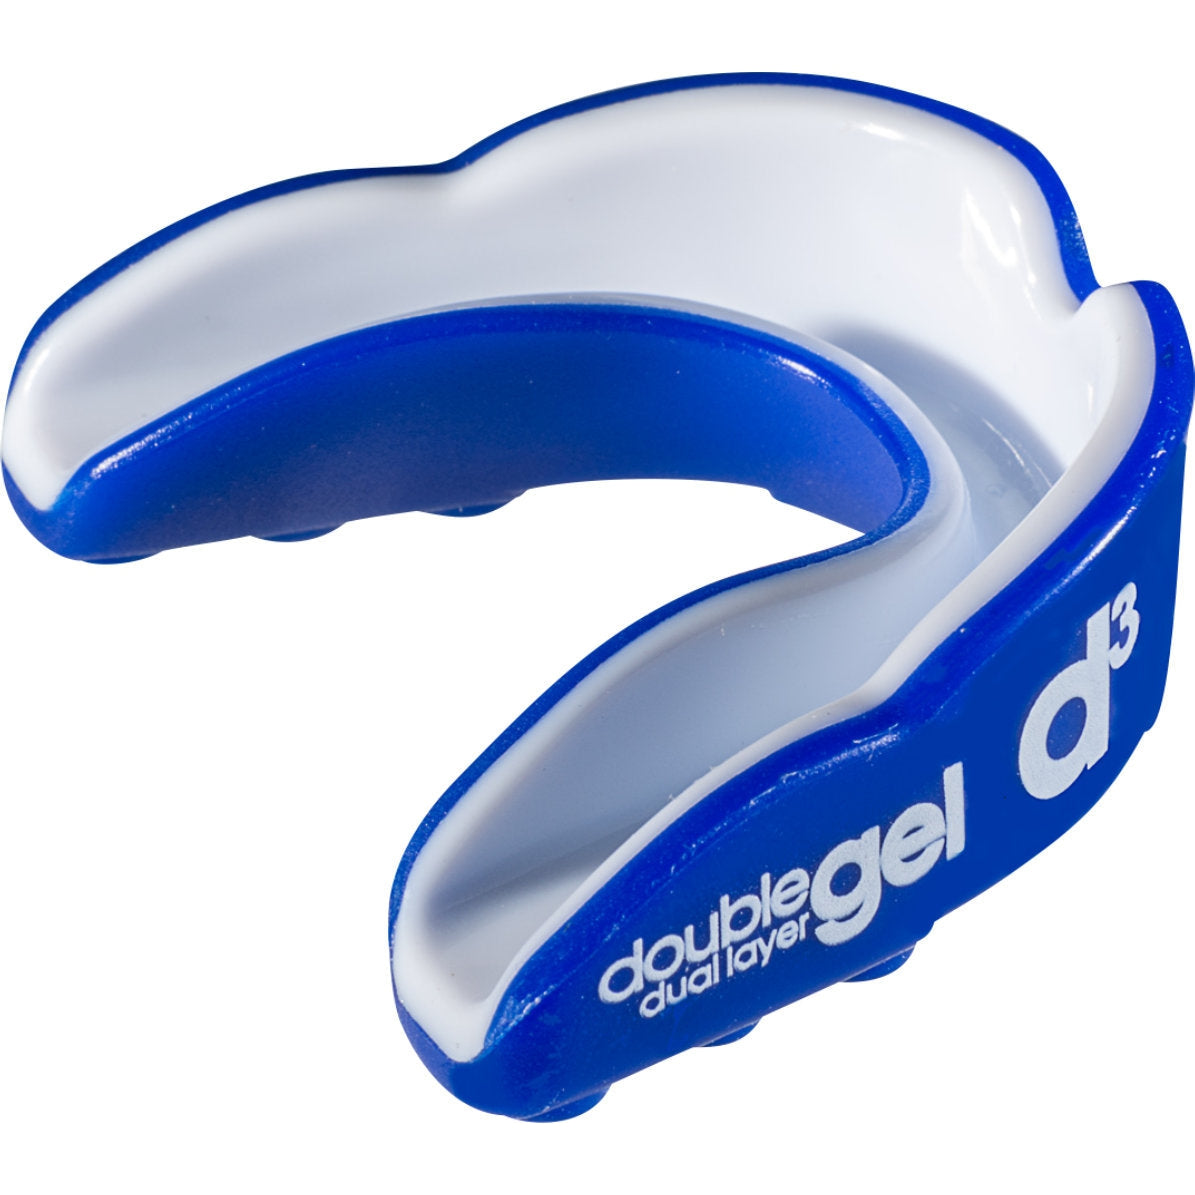 D3tape Mouthguard Blue / White Youths